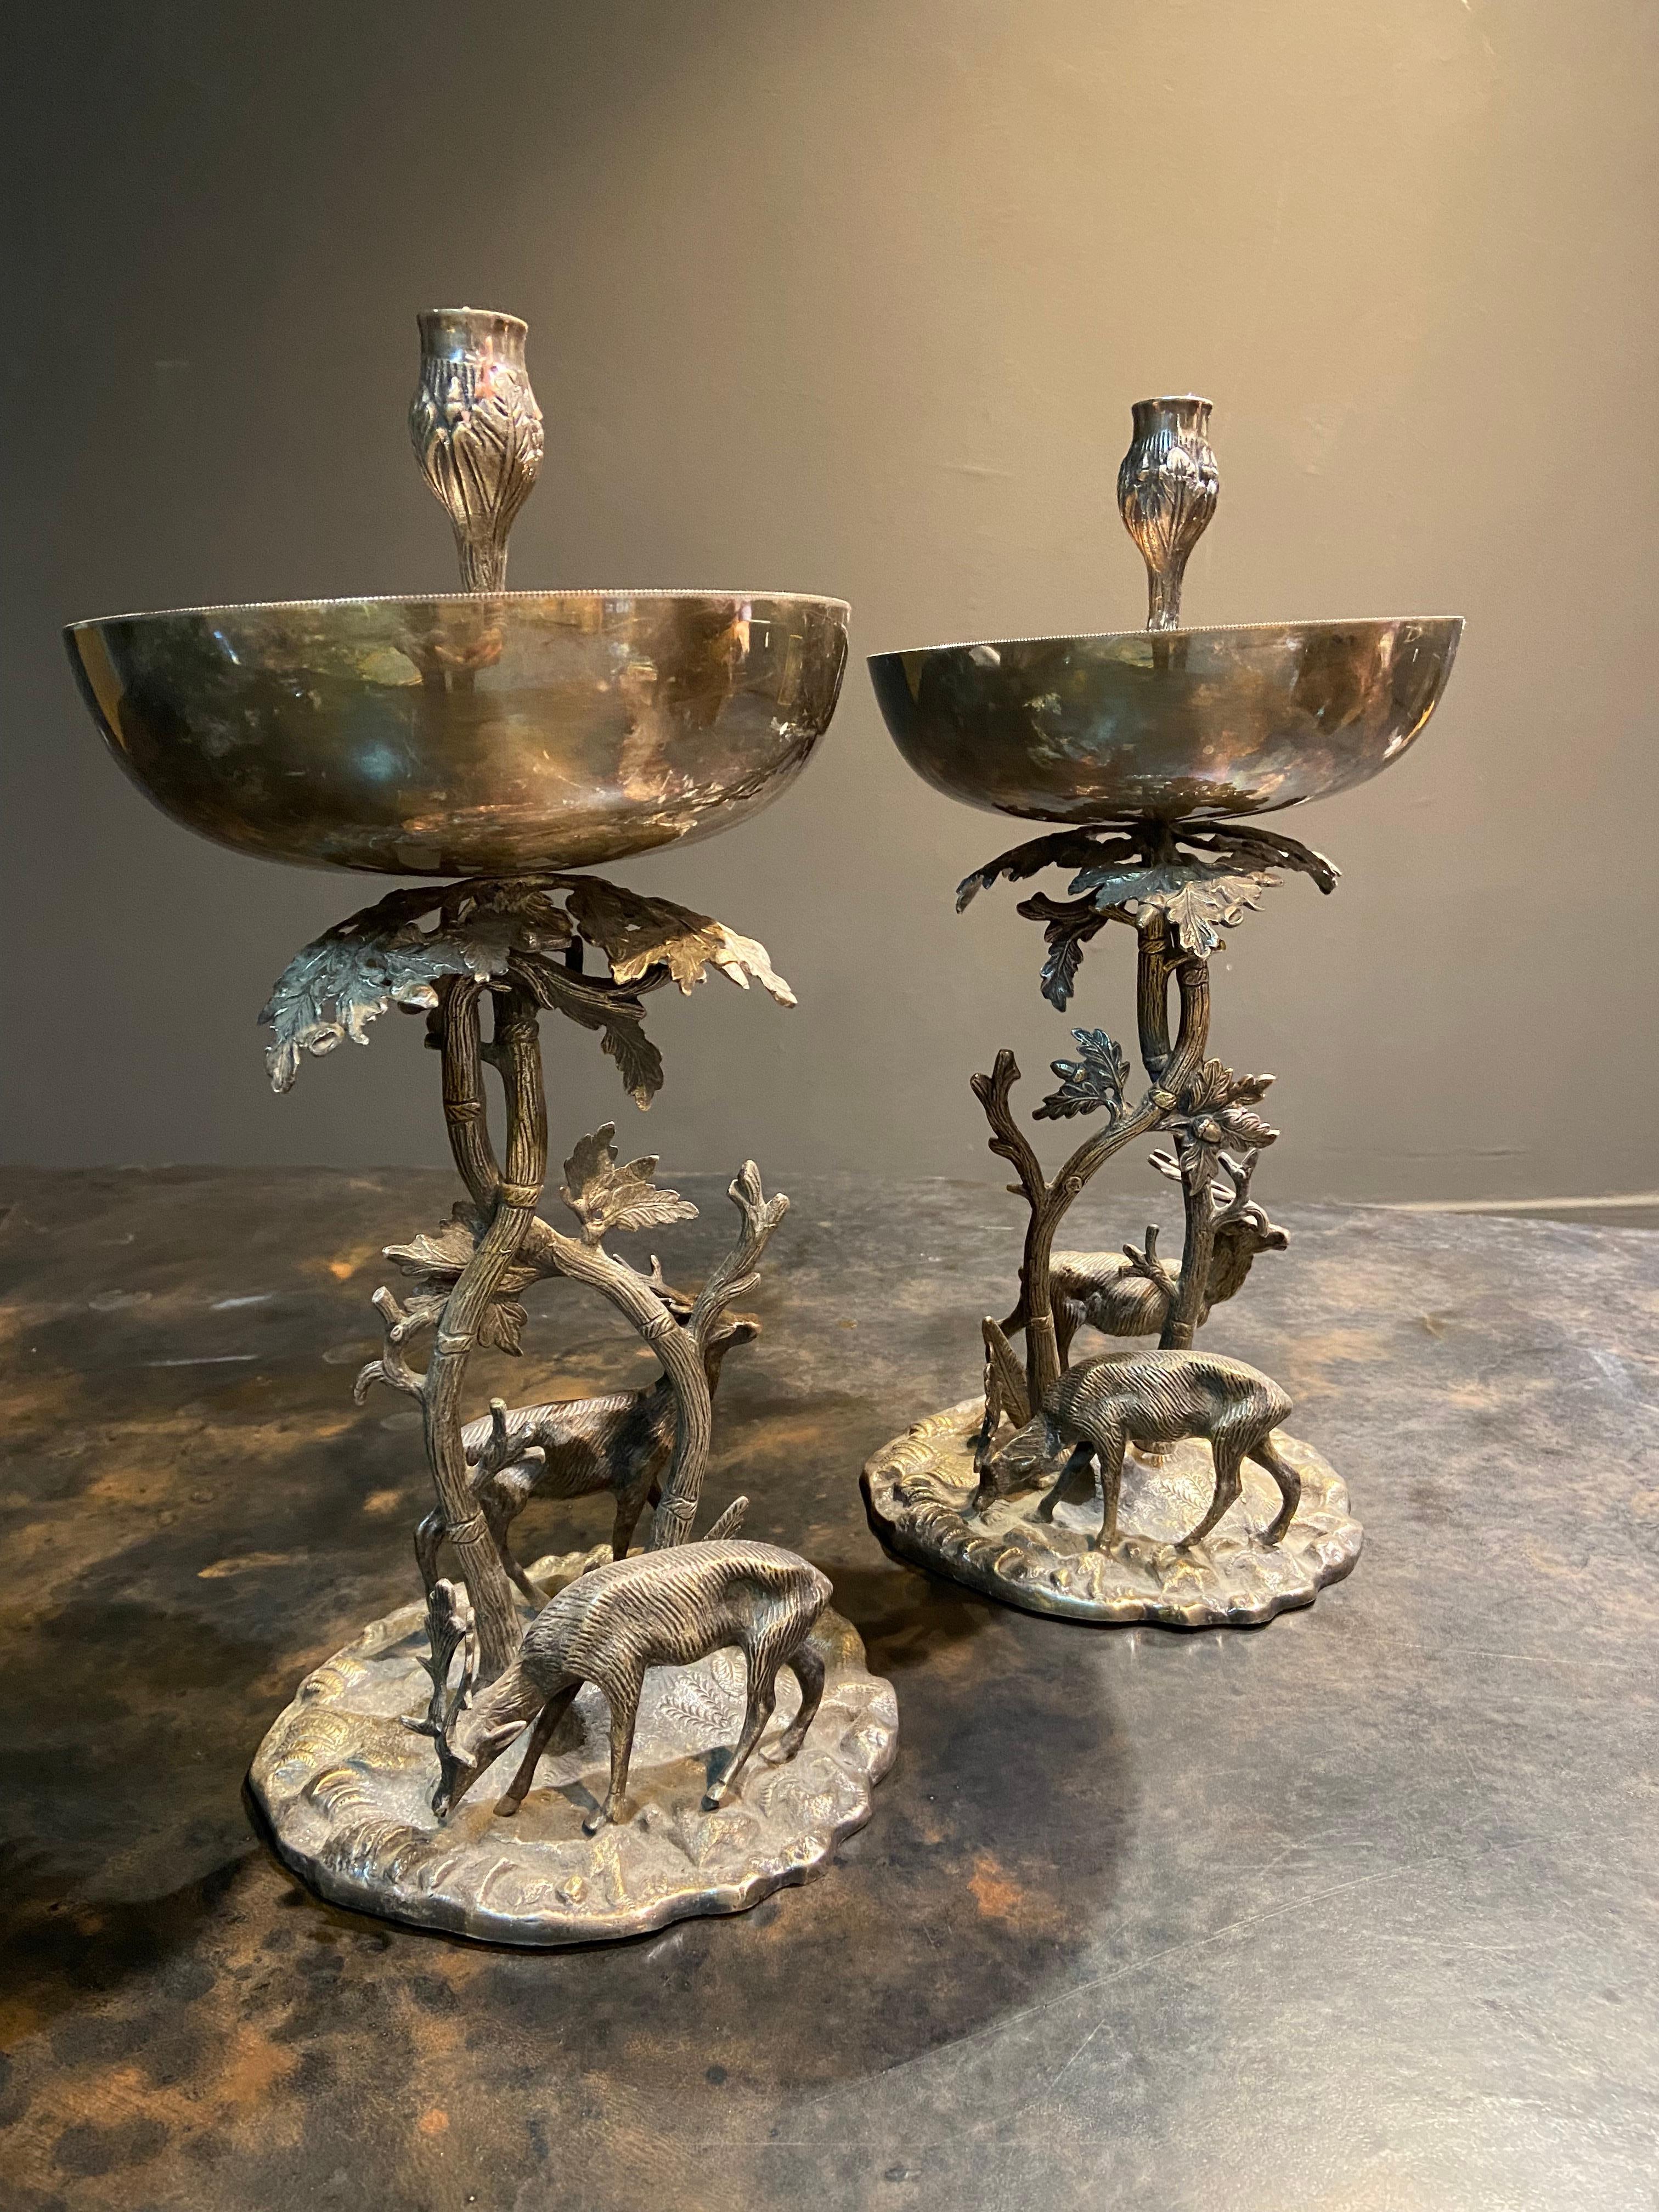 French pair of silver plated bronze candlesticks with brocade decoration on a mound, the branch supporting a cup and the candlestick surrounded by couple of deers.
France, circa 1950.